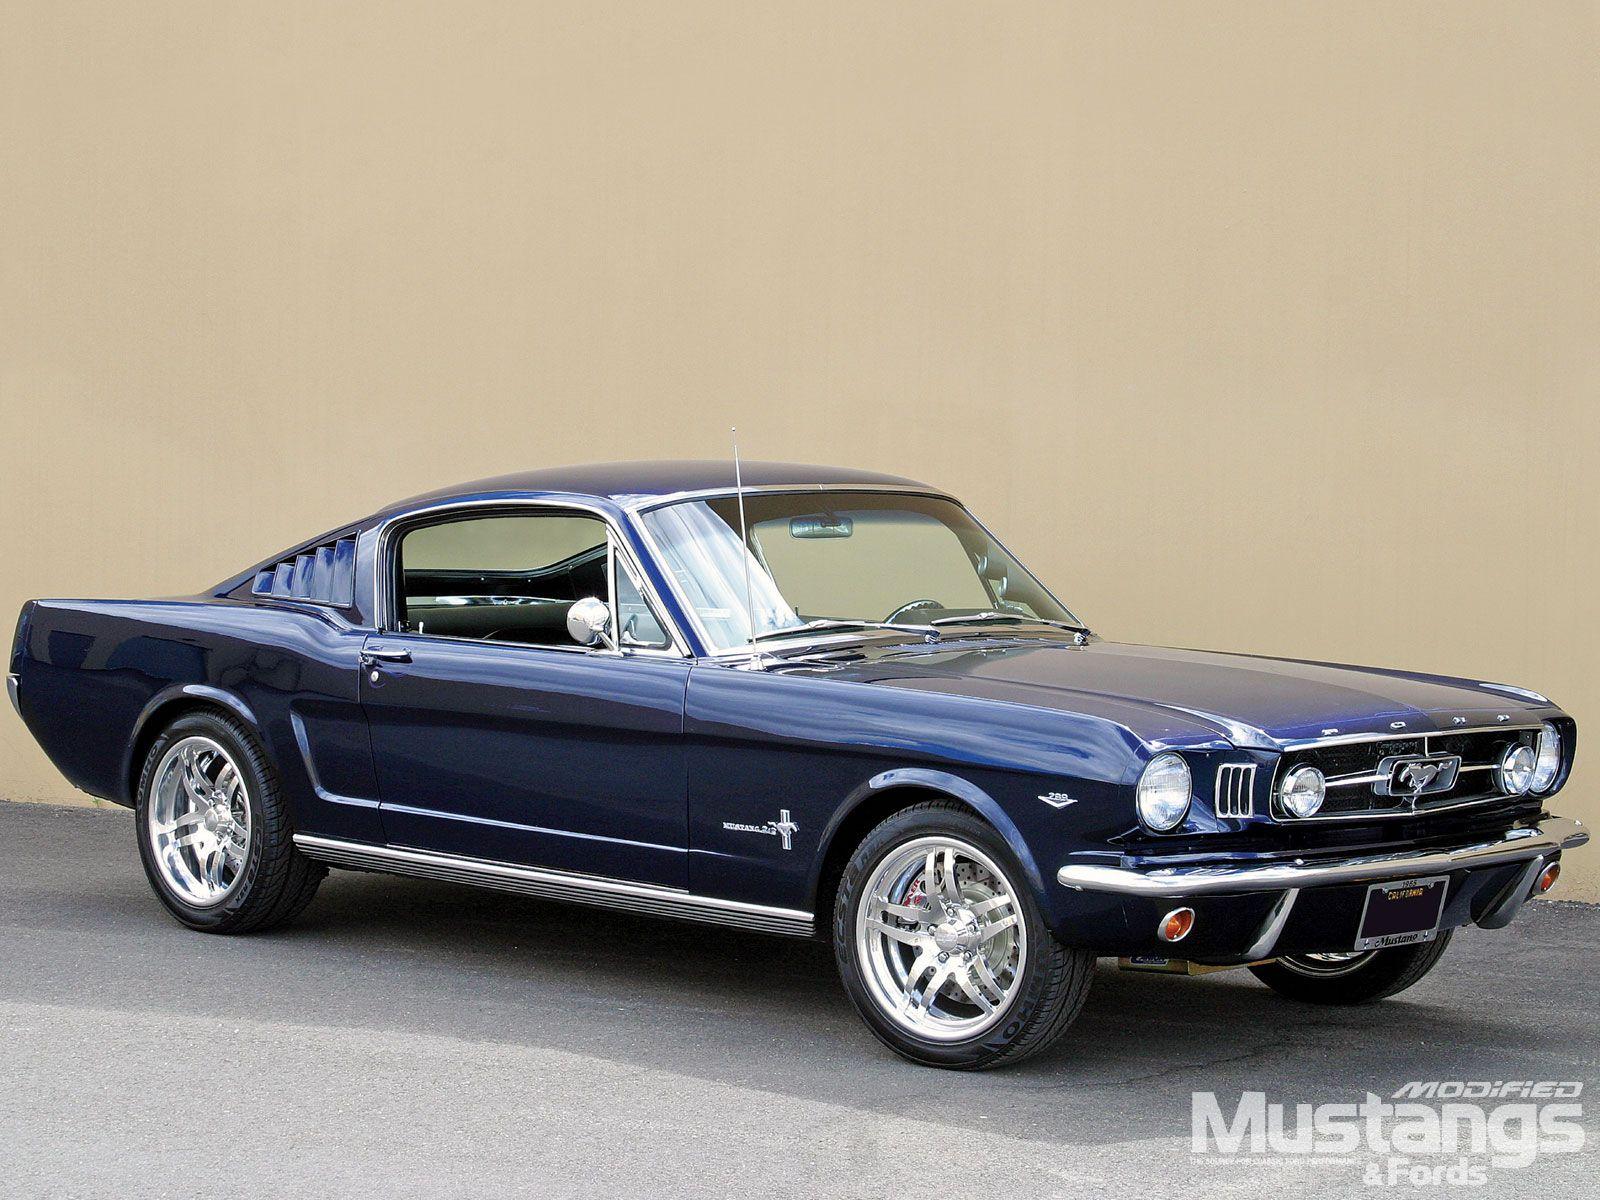 Ford Mustang wallpaper, Vehicles, HQ 1965 Ford Mustang